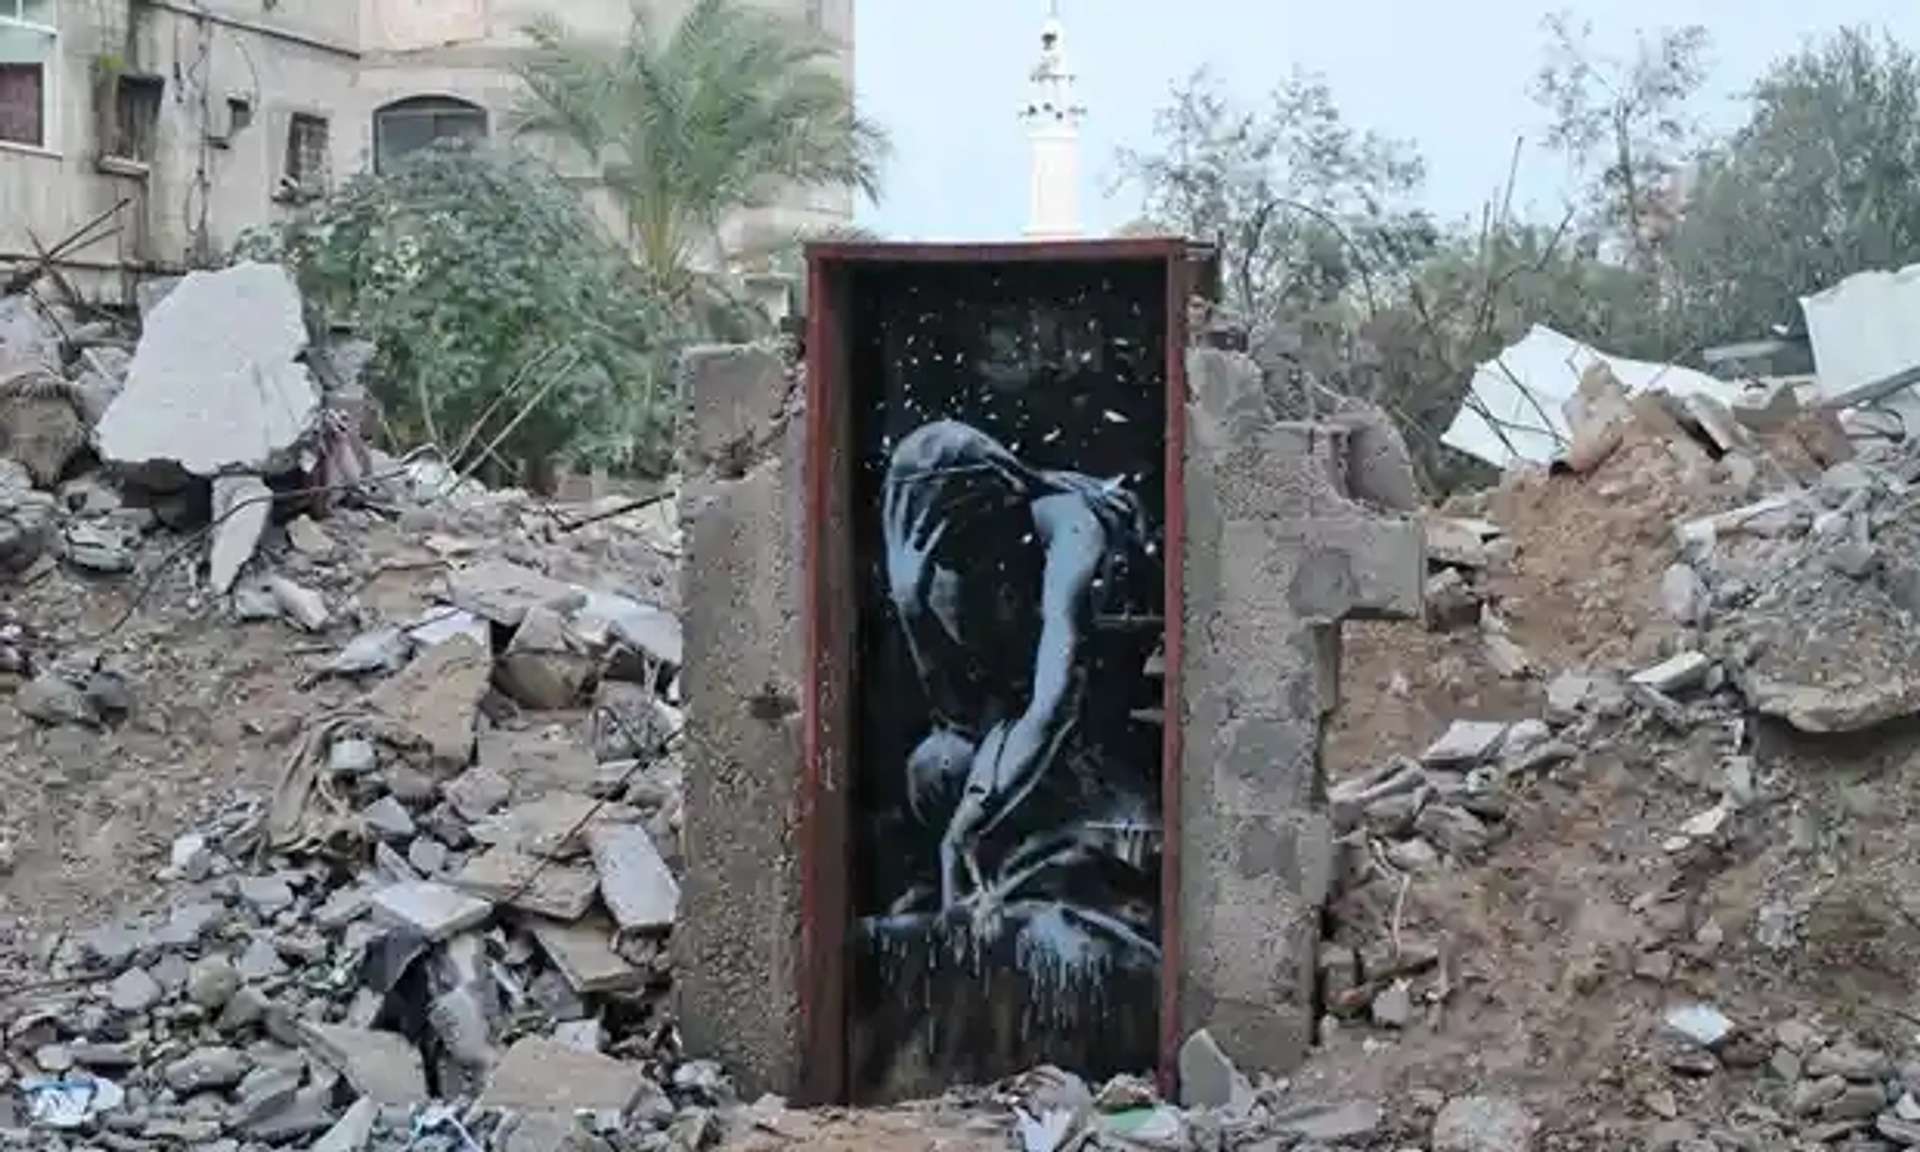 An image of a mural by Banksy amidst the rubble in Gaza. It shows a bent over man, with his head in his hands, depicted in monochrome.